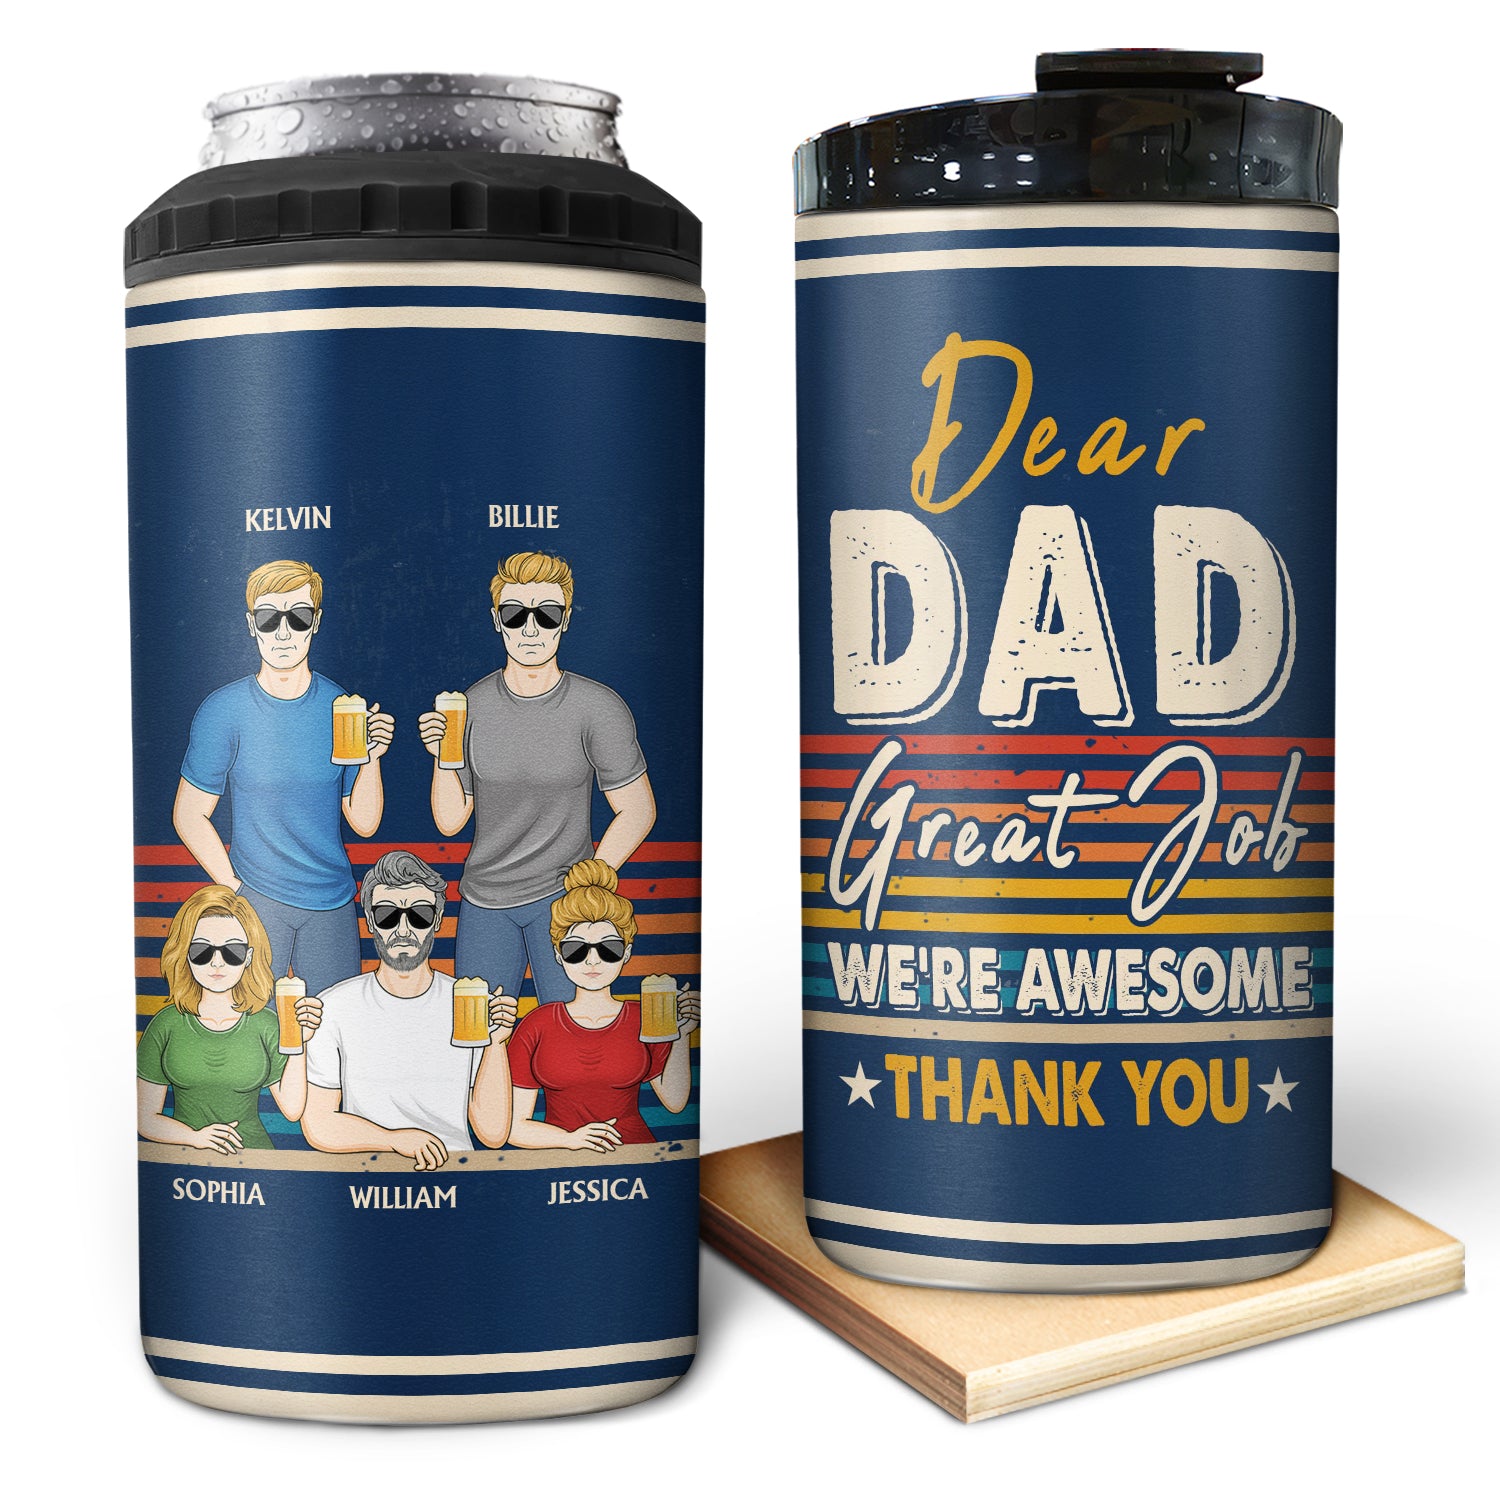 Dear Dad Great Job We're Awesome Thank You Family - Funny, Birthday Gift For Father, Papa, Husband - Personalized Custom 4 In 1 Can Cooler Tumbler